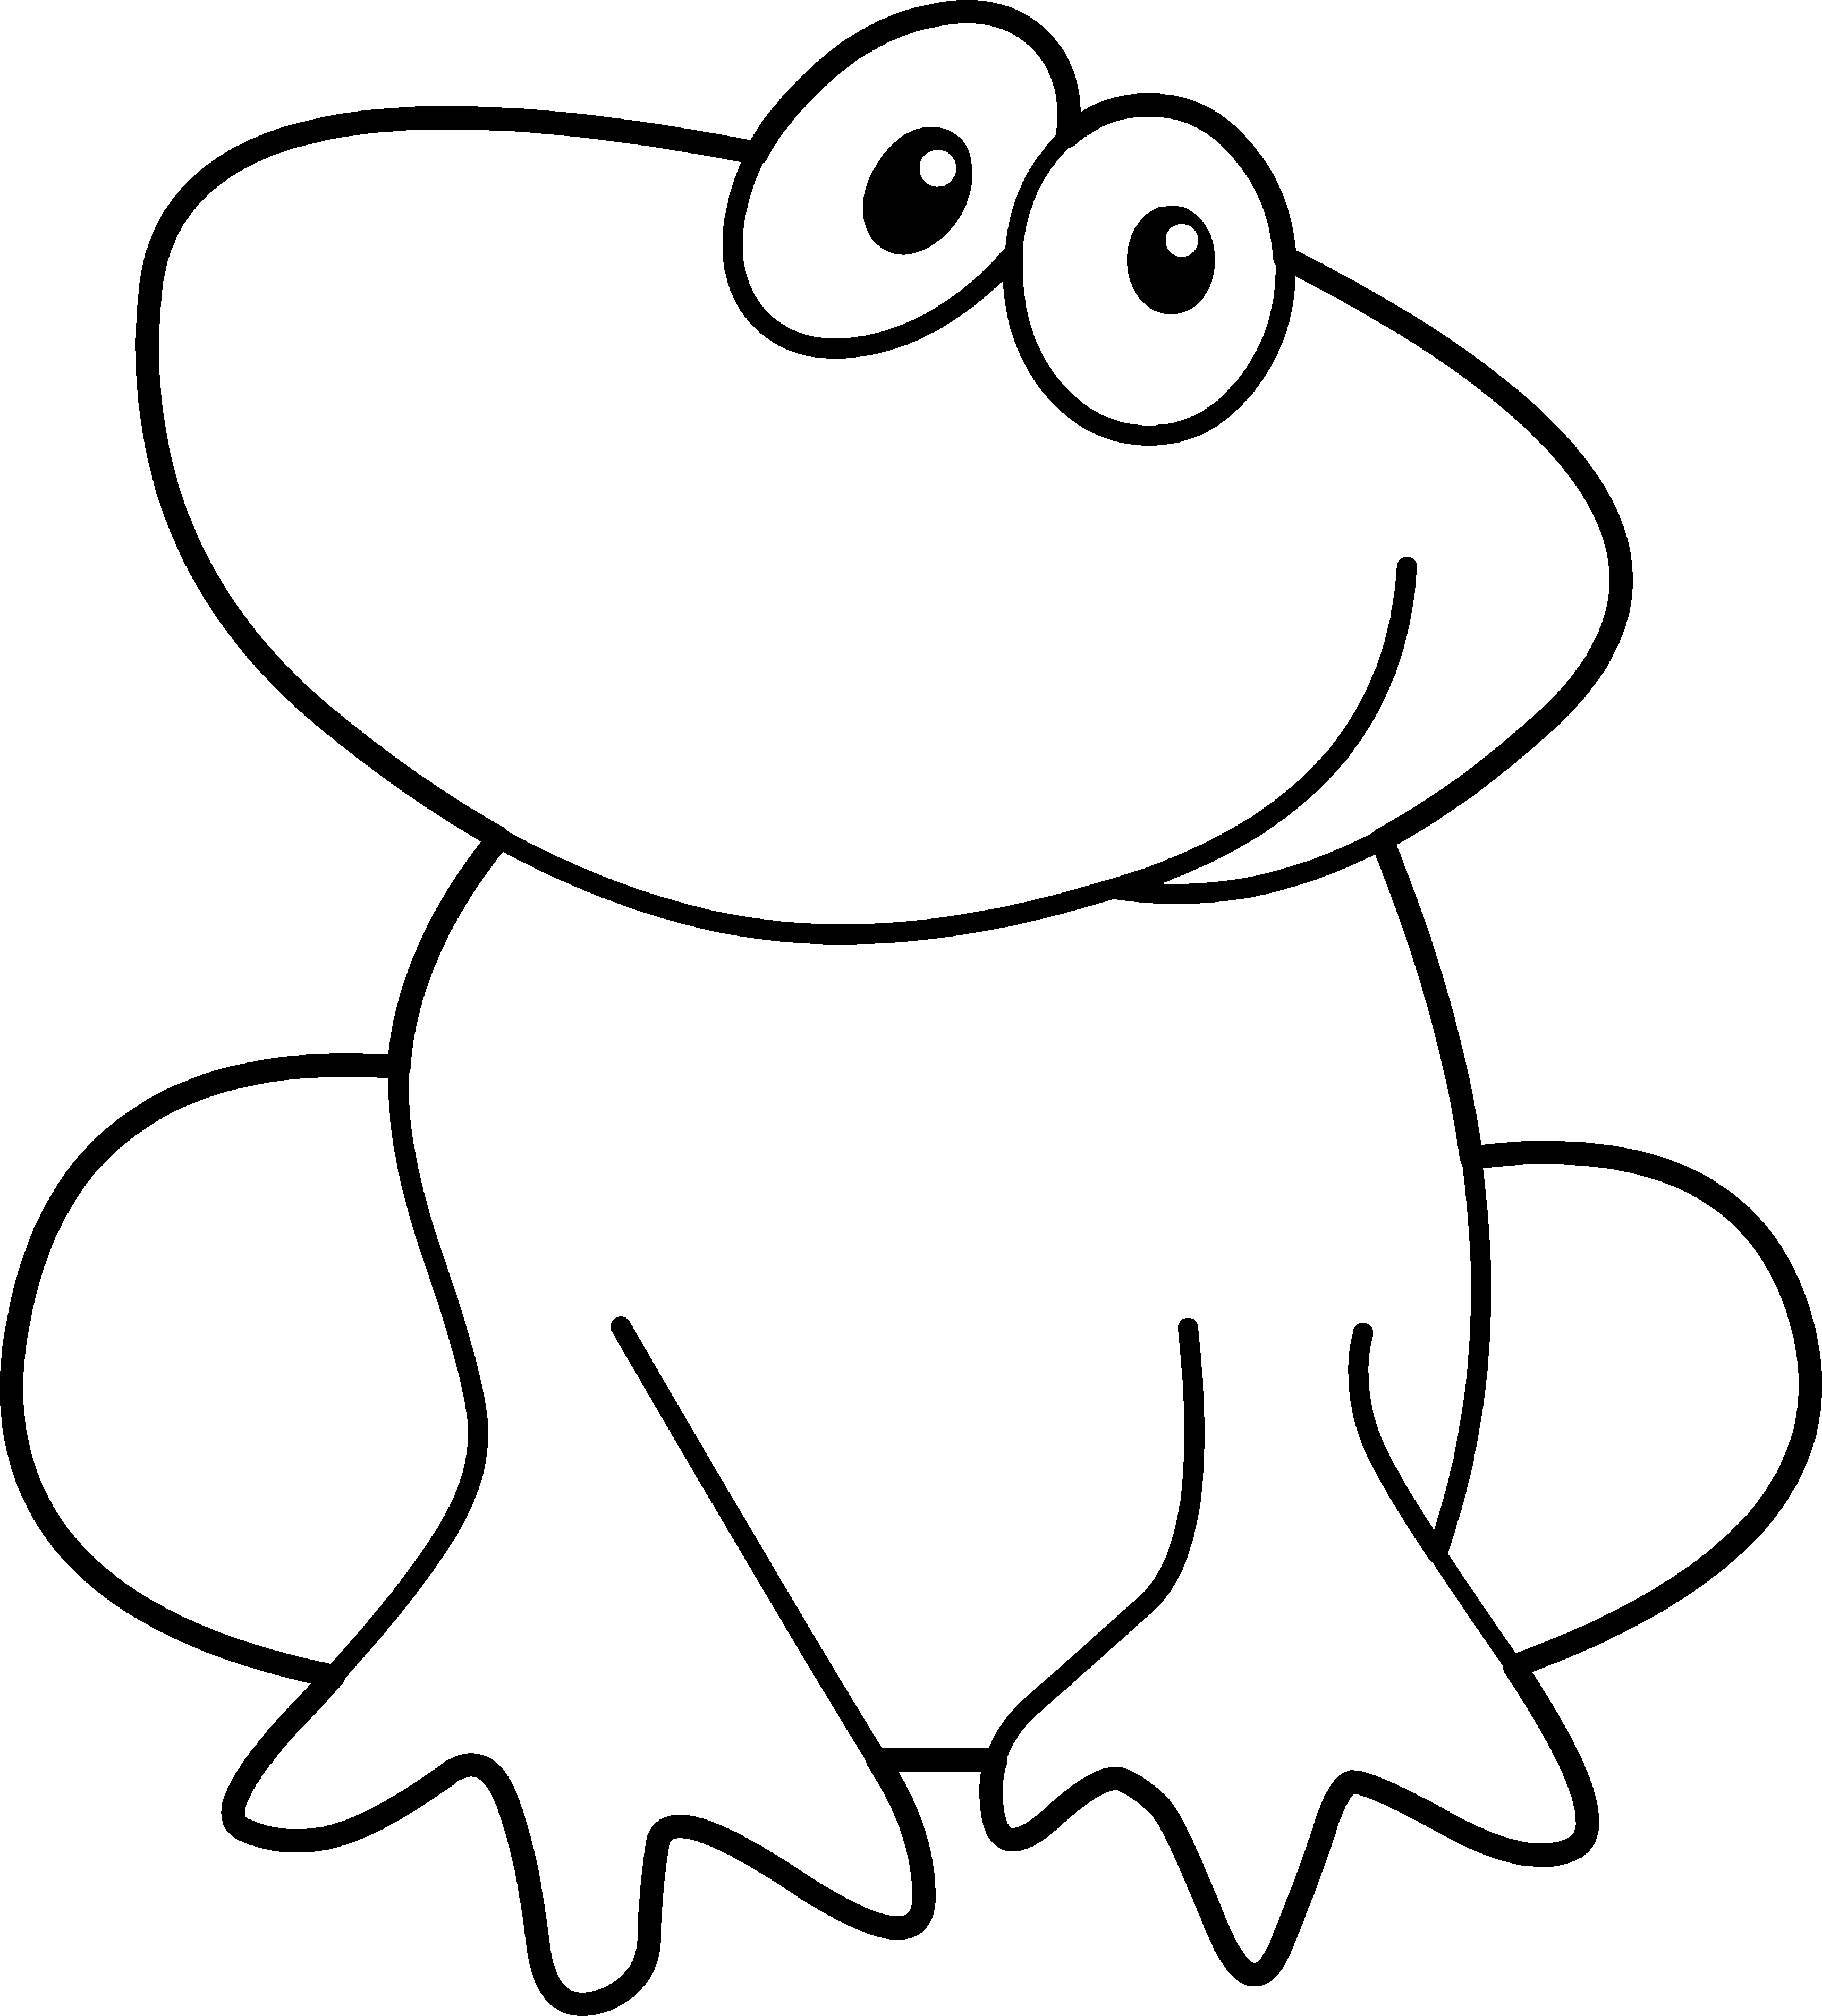 Cute Frog Coloring Page - Free Clip Art